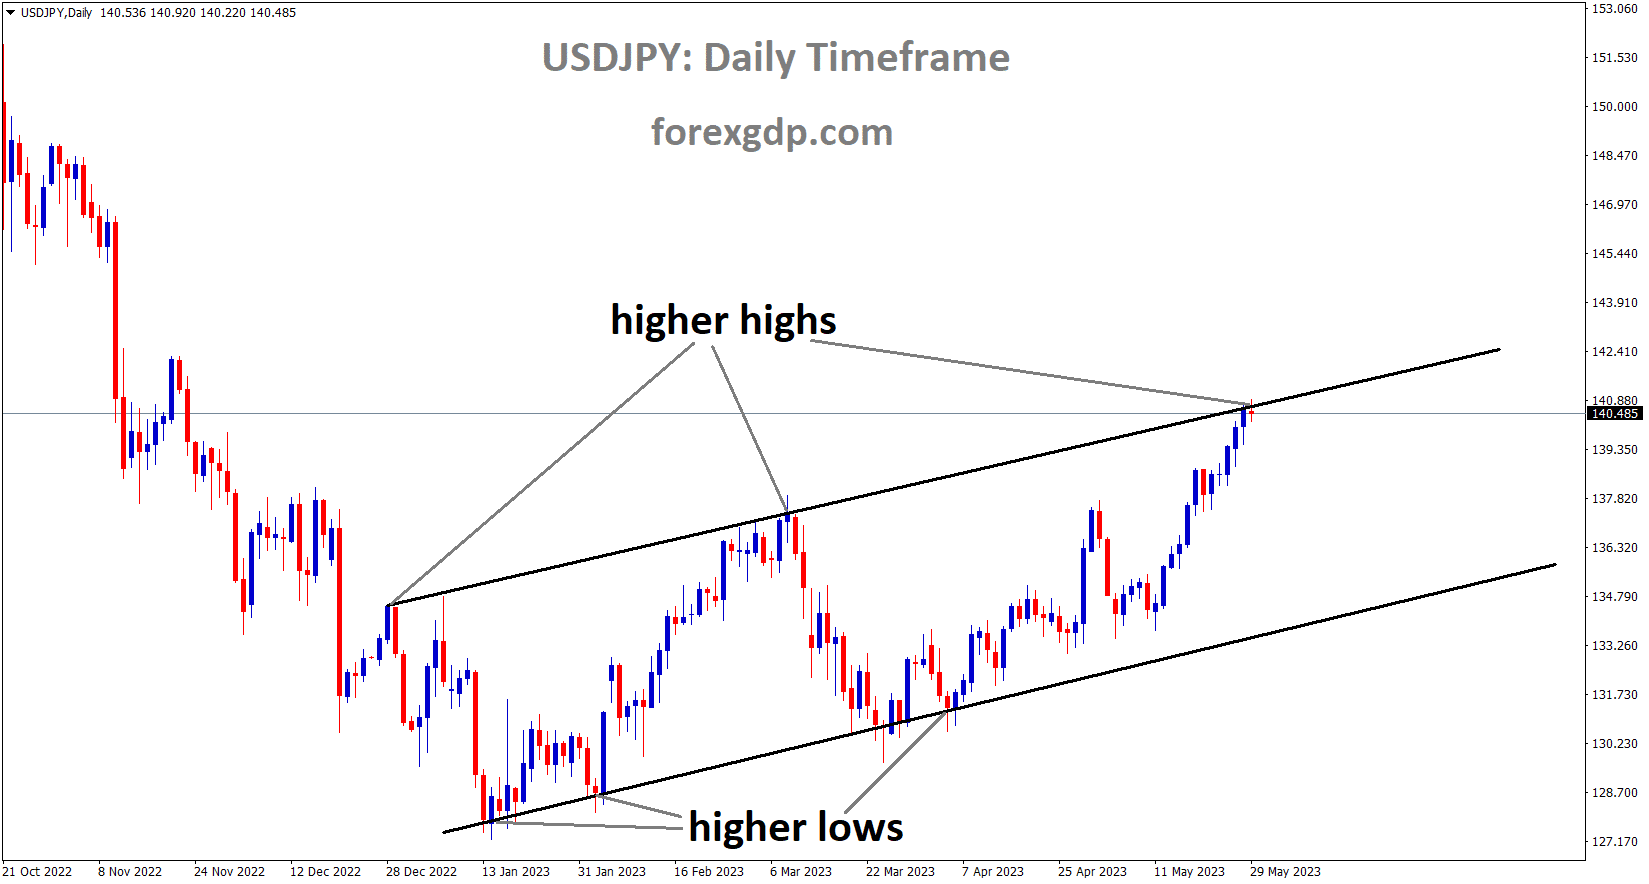 USDJPY is moving in an Ascending Channel and the market has reached the higher high area of the channel 1